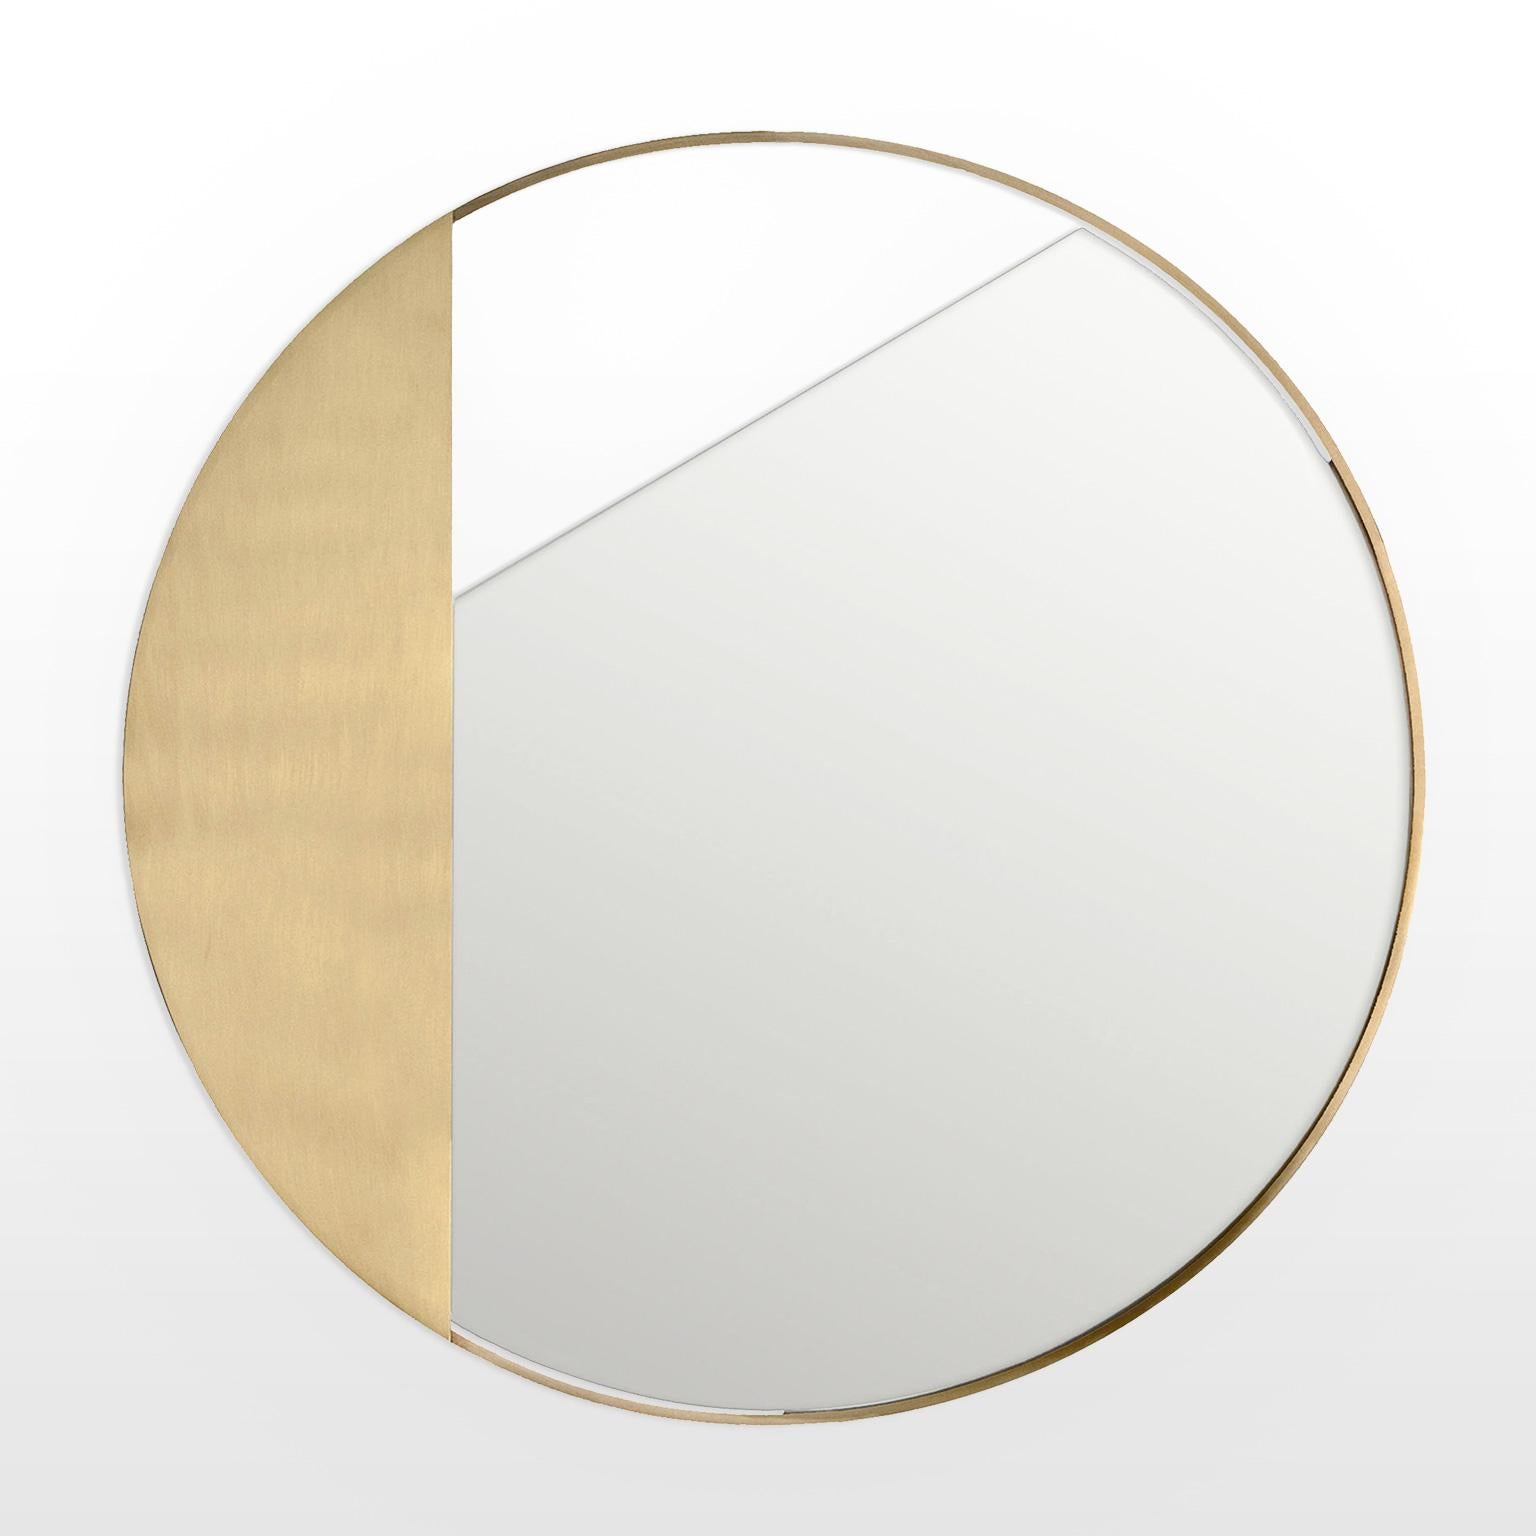 Revolution V1 is a 21st Century mirror of 90 cm diameter, made by Italian artisans in different shades and colors. It is part of the collectible design language Revolution that has been developed by the Edizione Limitata's art research team in